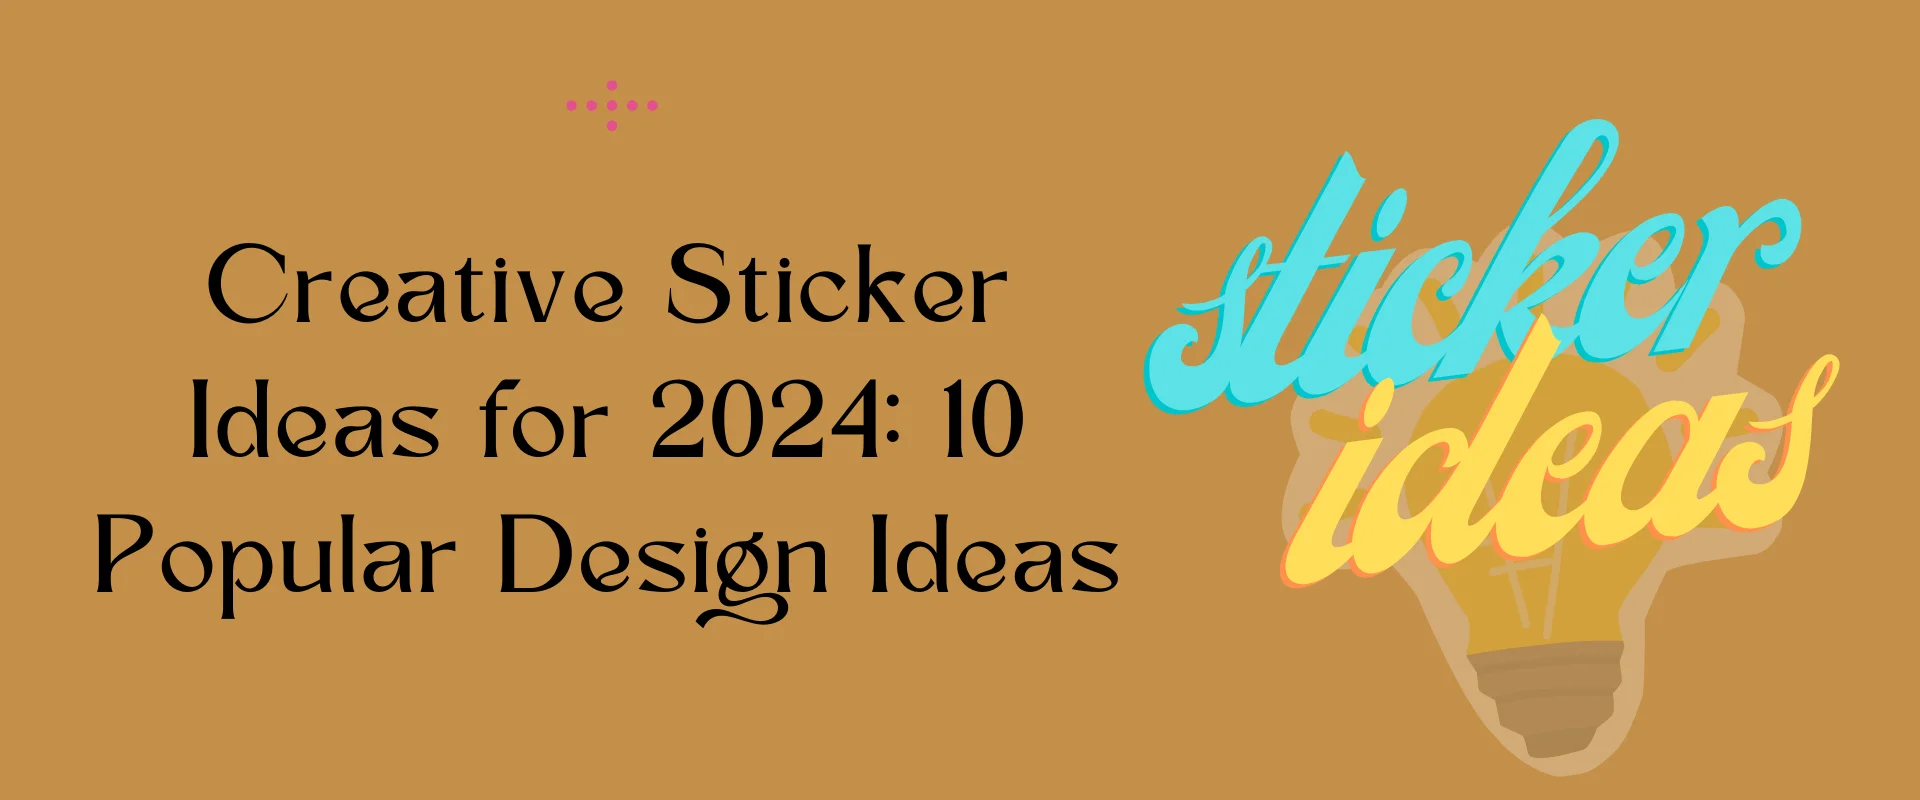 12 Fishing Decals and Magnets ideas in 2024